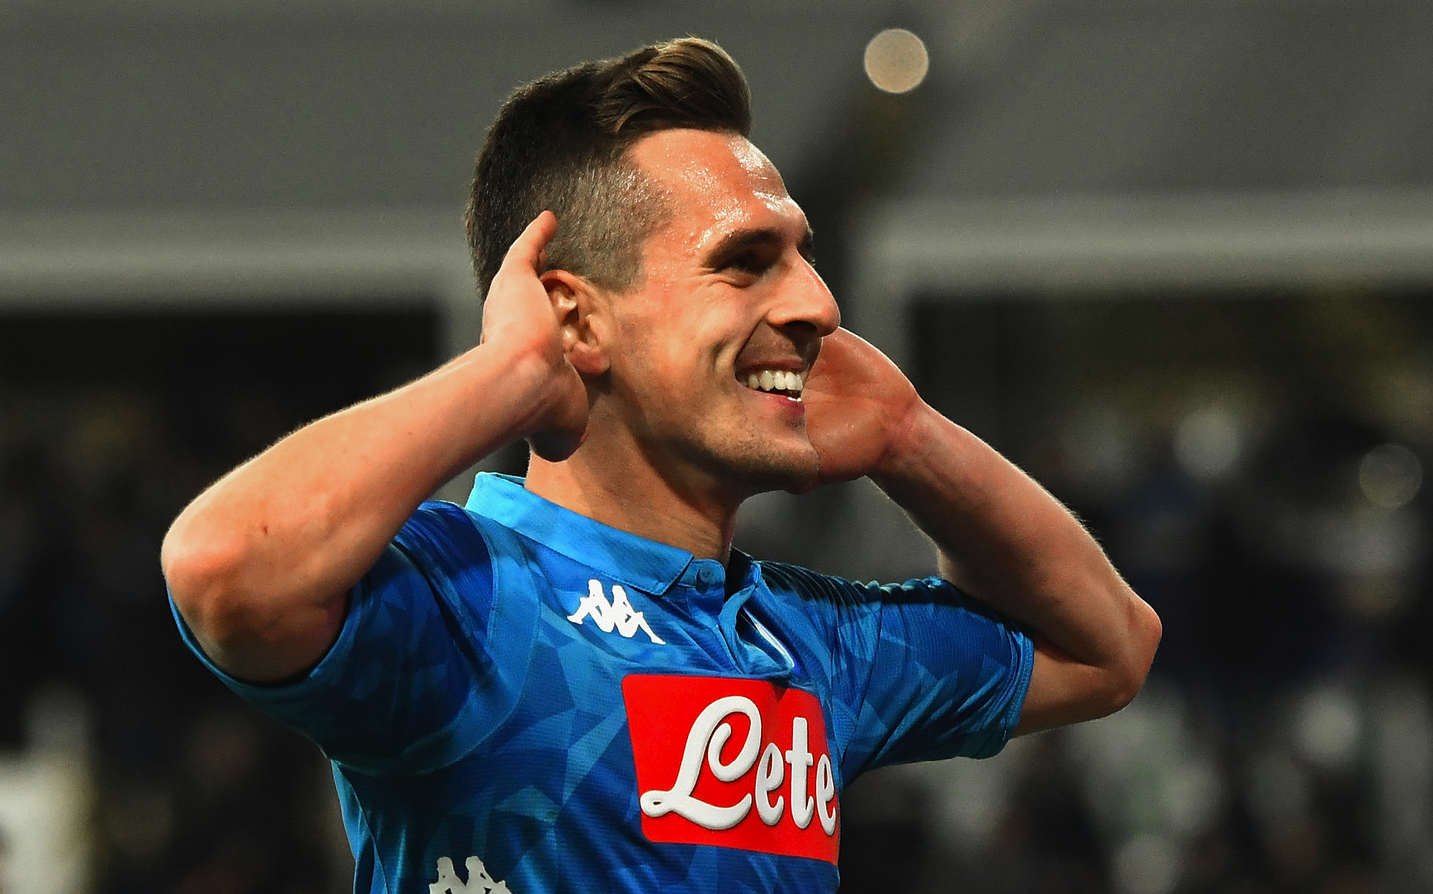 Napoli's Arek Milik has reportedly rejected a 5 million euro contract from Roma, bringing down a transfer trifecta in the Serie A